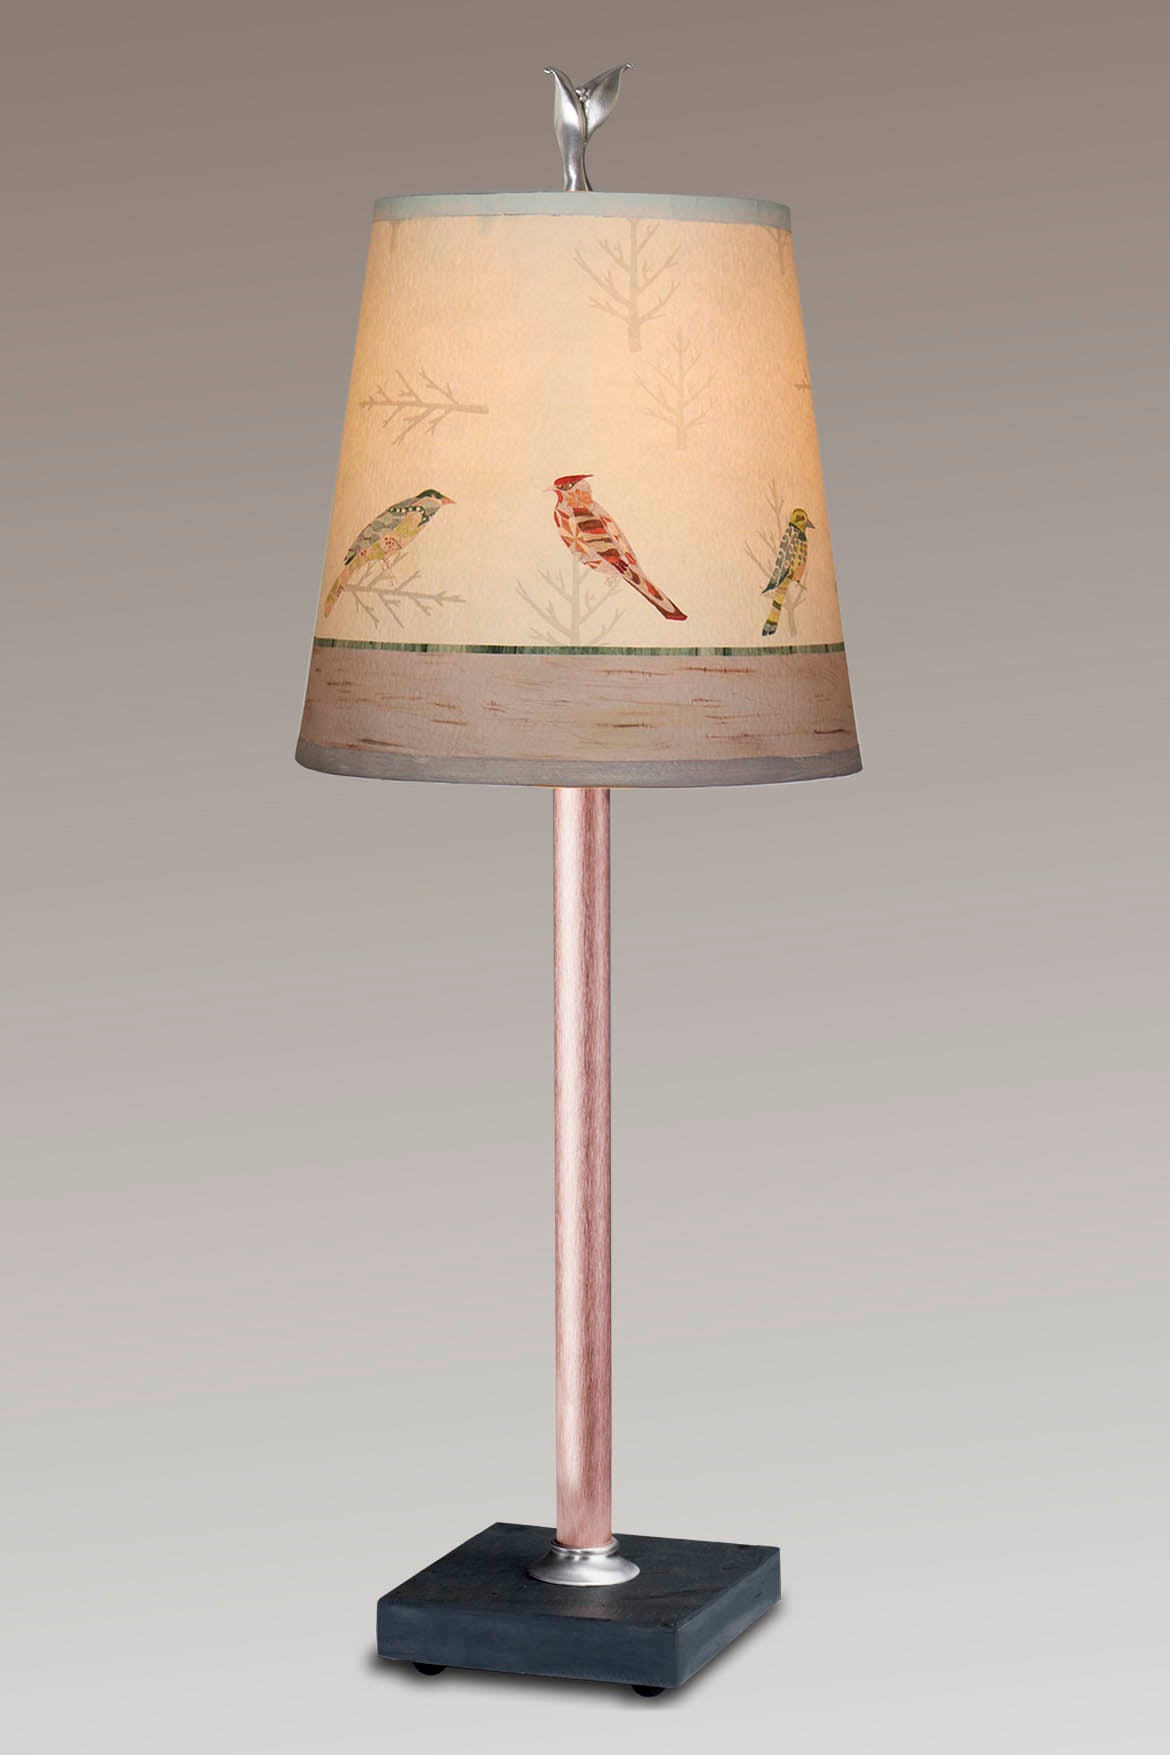 Janna Ugone &amp; Co Table Lamp Copper Table Lamp with Small Drum Shade in Bird Friends